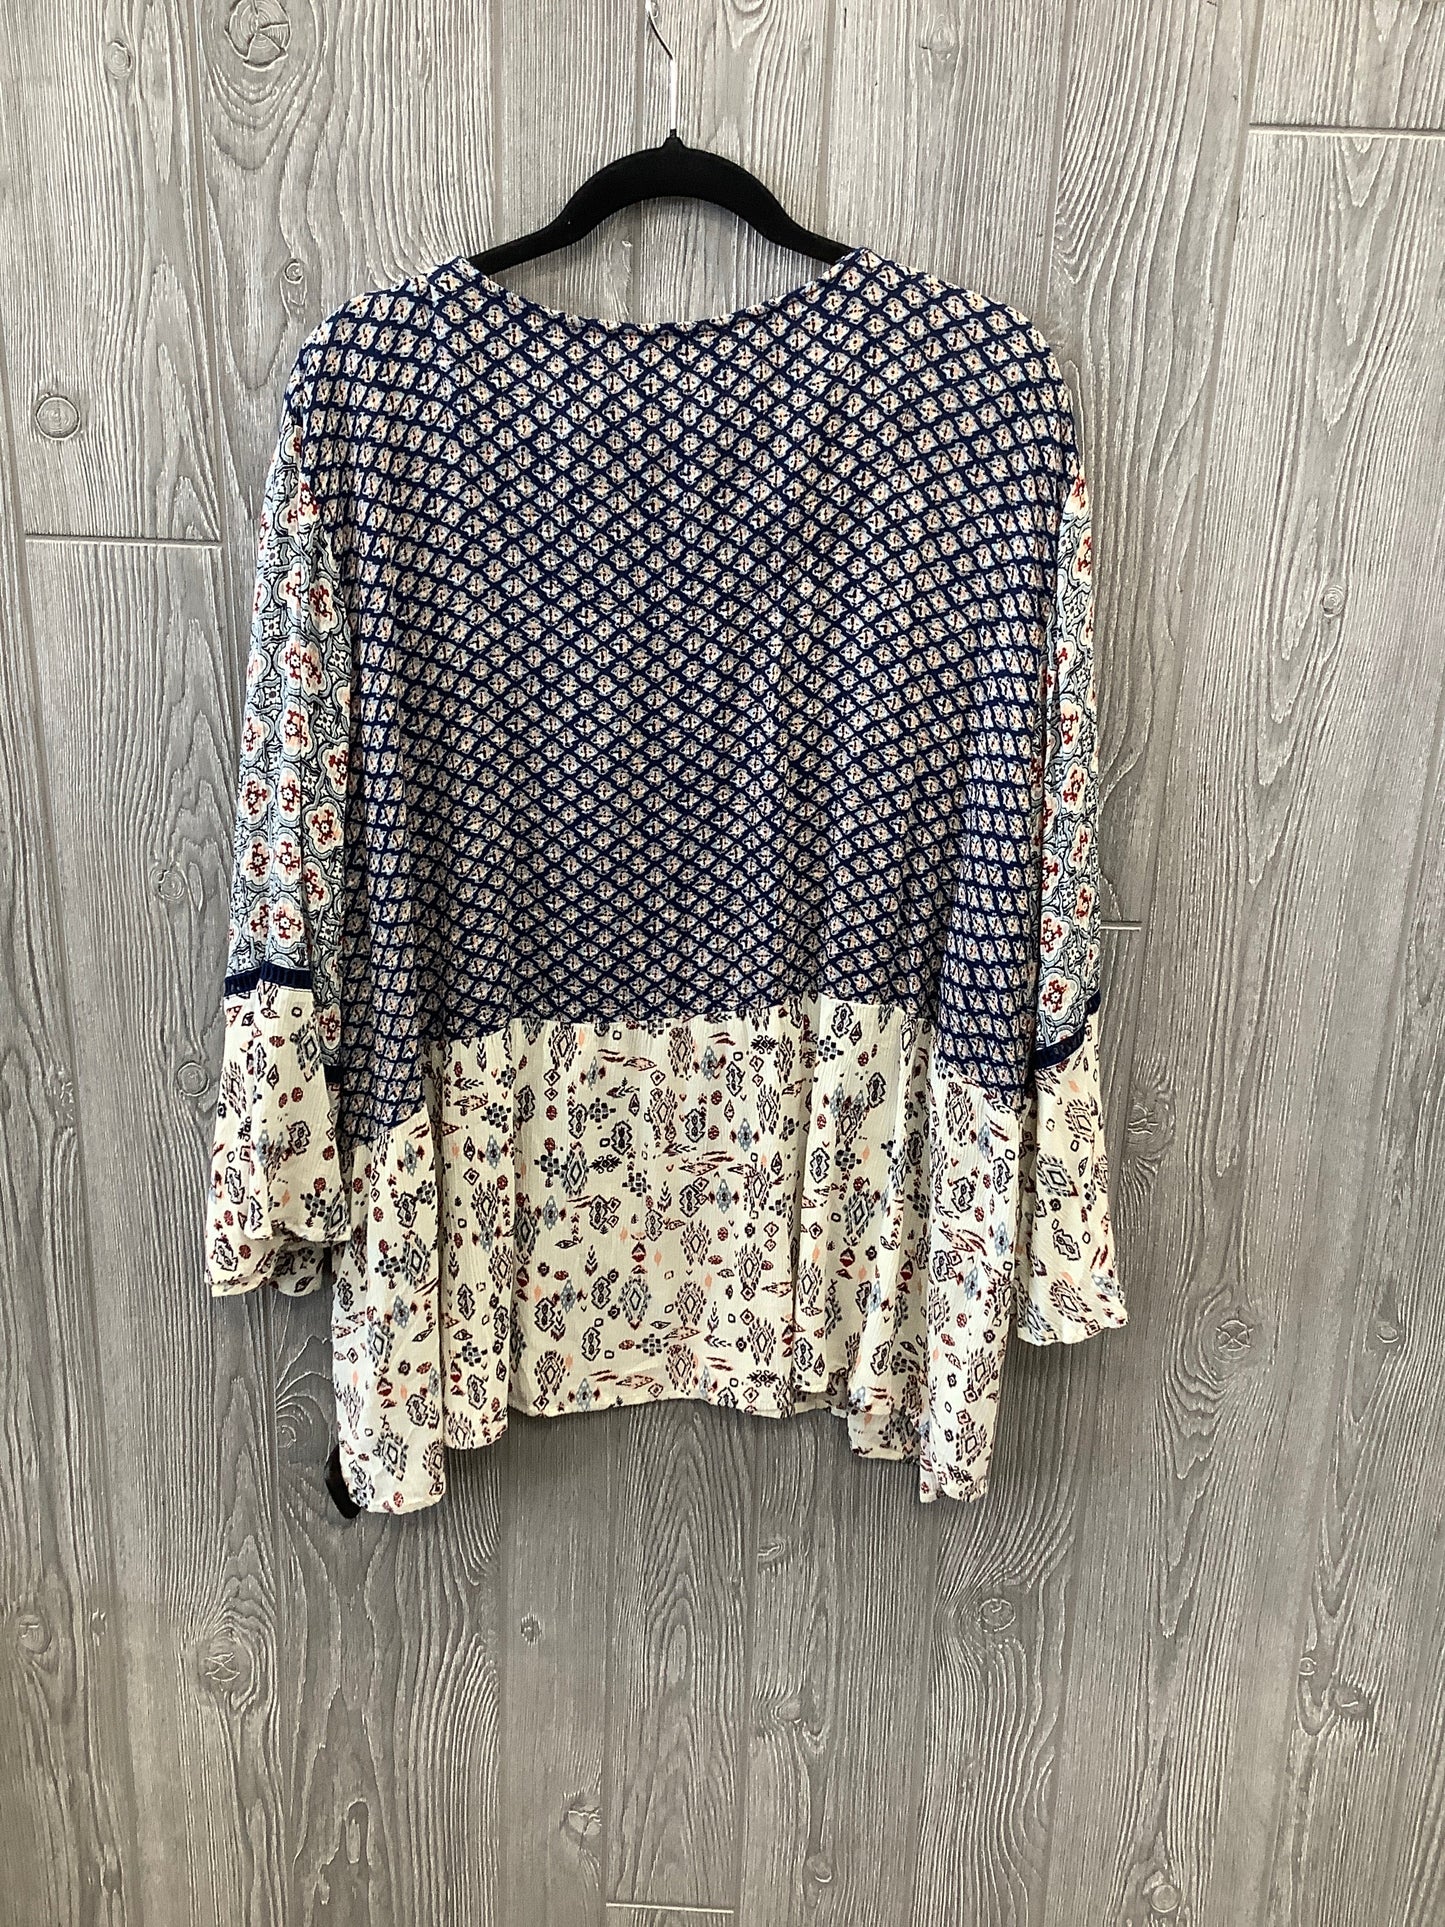 Multi-colored Blouse Long Sleeve Coldwater Creek, Size 3x